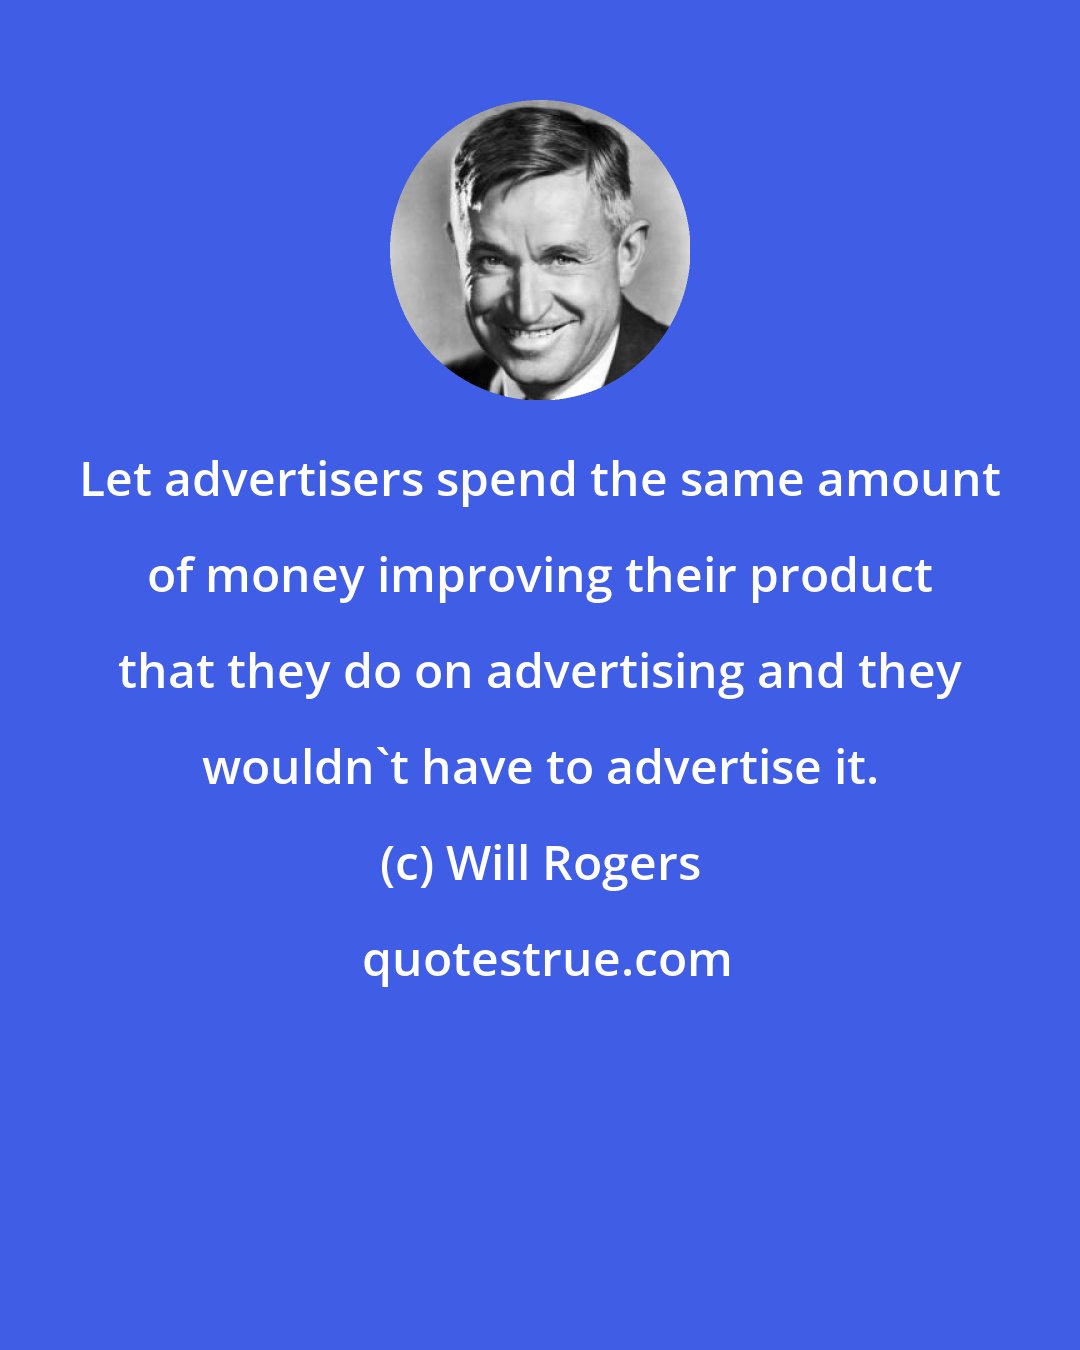 Will Rogers: Let advertisers spend the same amount of money improving their product that they do on advertising and they wouldn't have to advertise it.